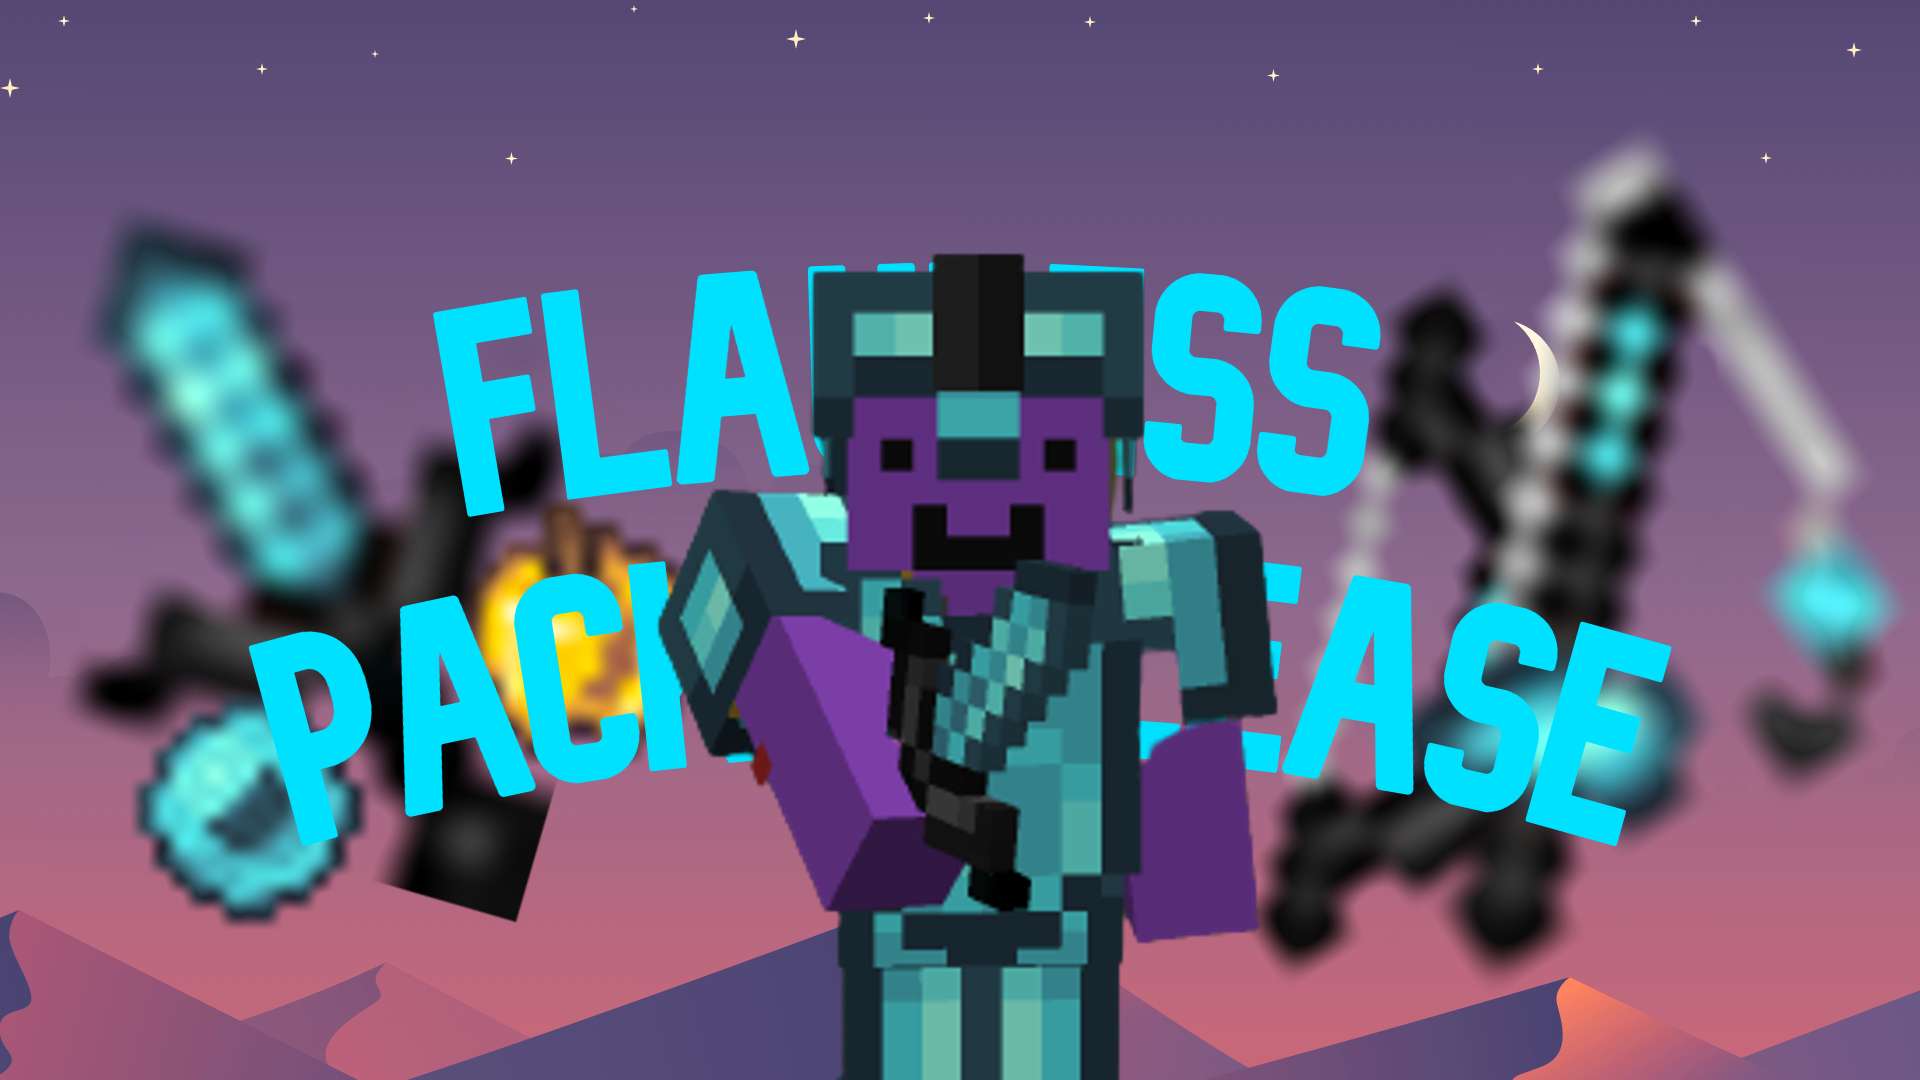 FLAULESS // Jraconic 100 subs 16x by jraconic & rlpks on PvPRP